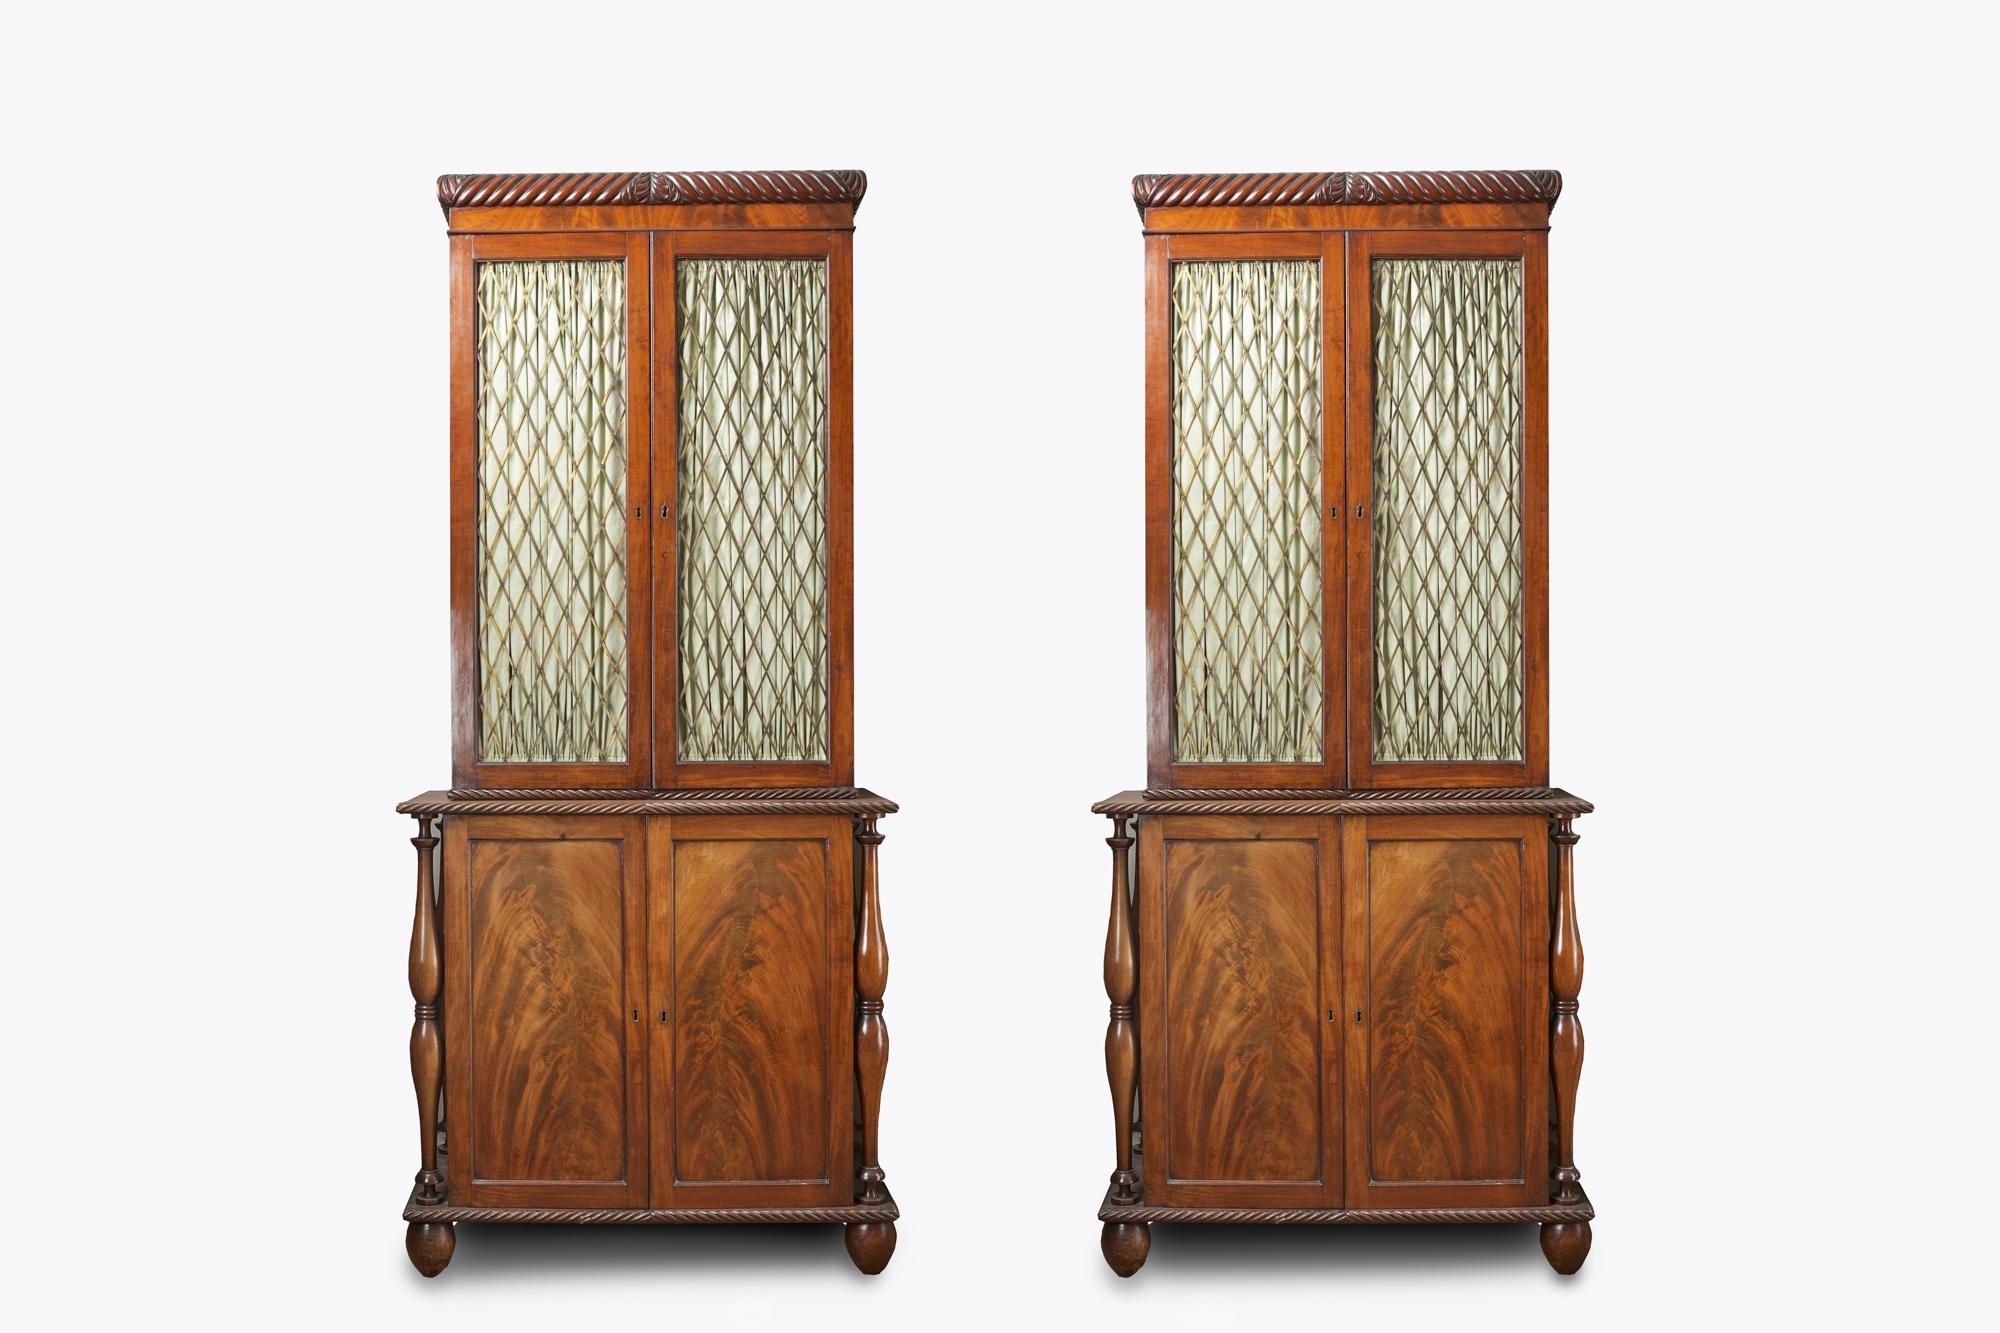 19th century Irish pair of cork flame mahogany bookcases, the upper section with stepped cornice with carved rope twist and acanthus flower motif raised above two brass grille lined doors with rope twist detail opening to reveal shelved interior.